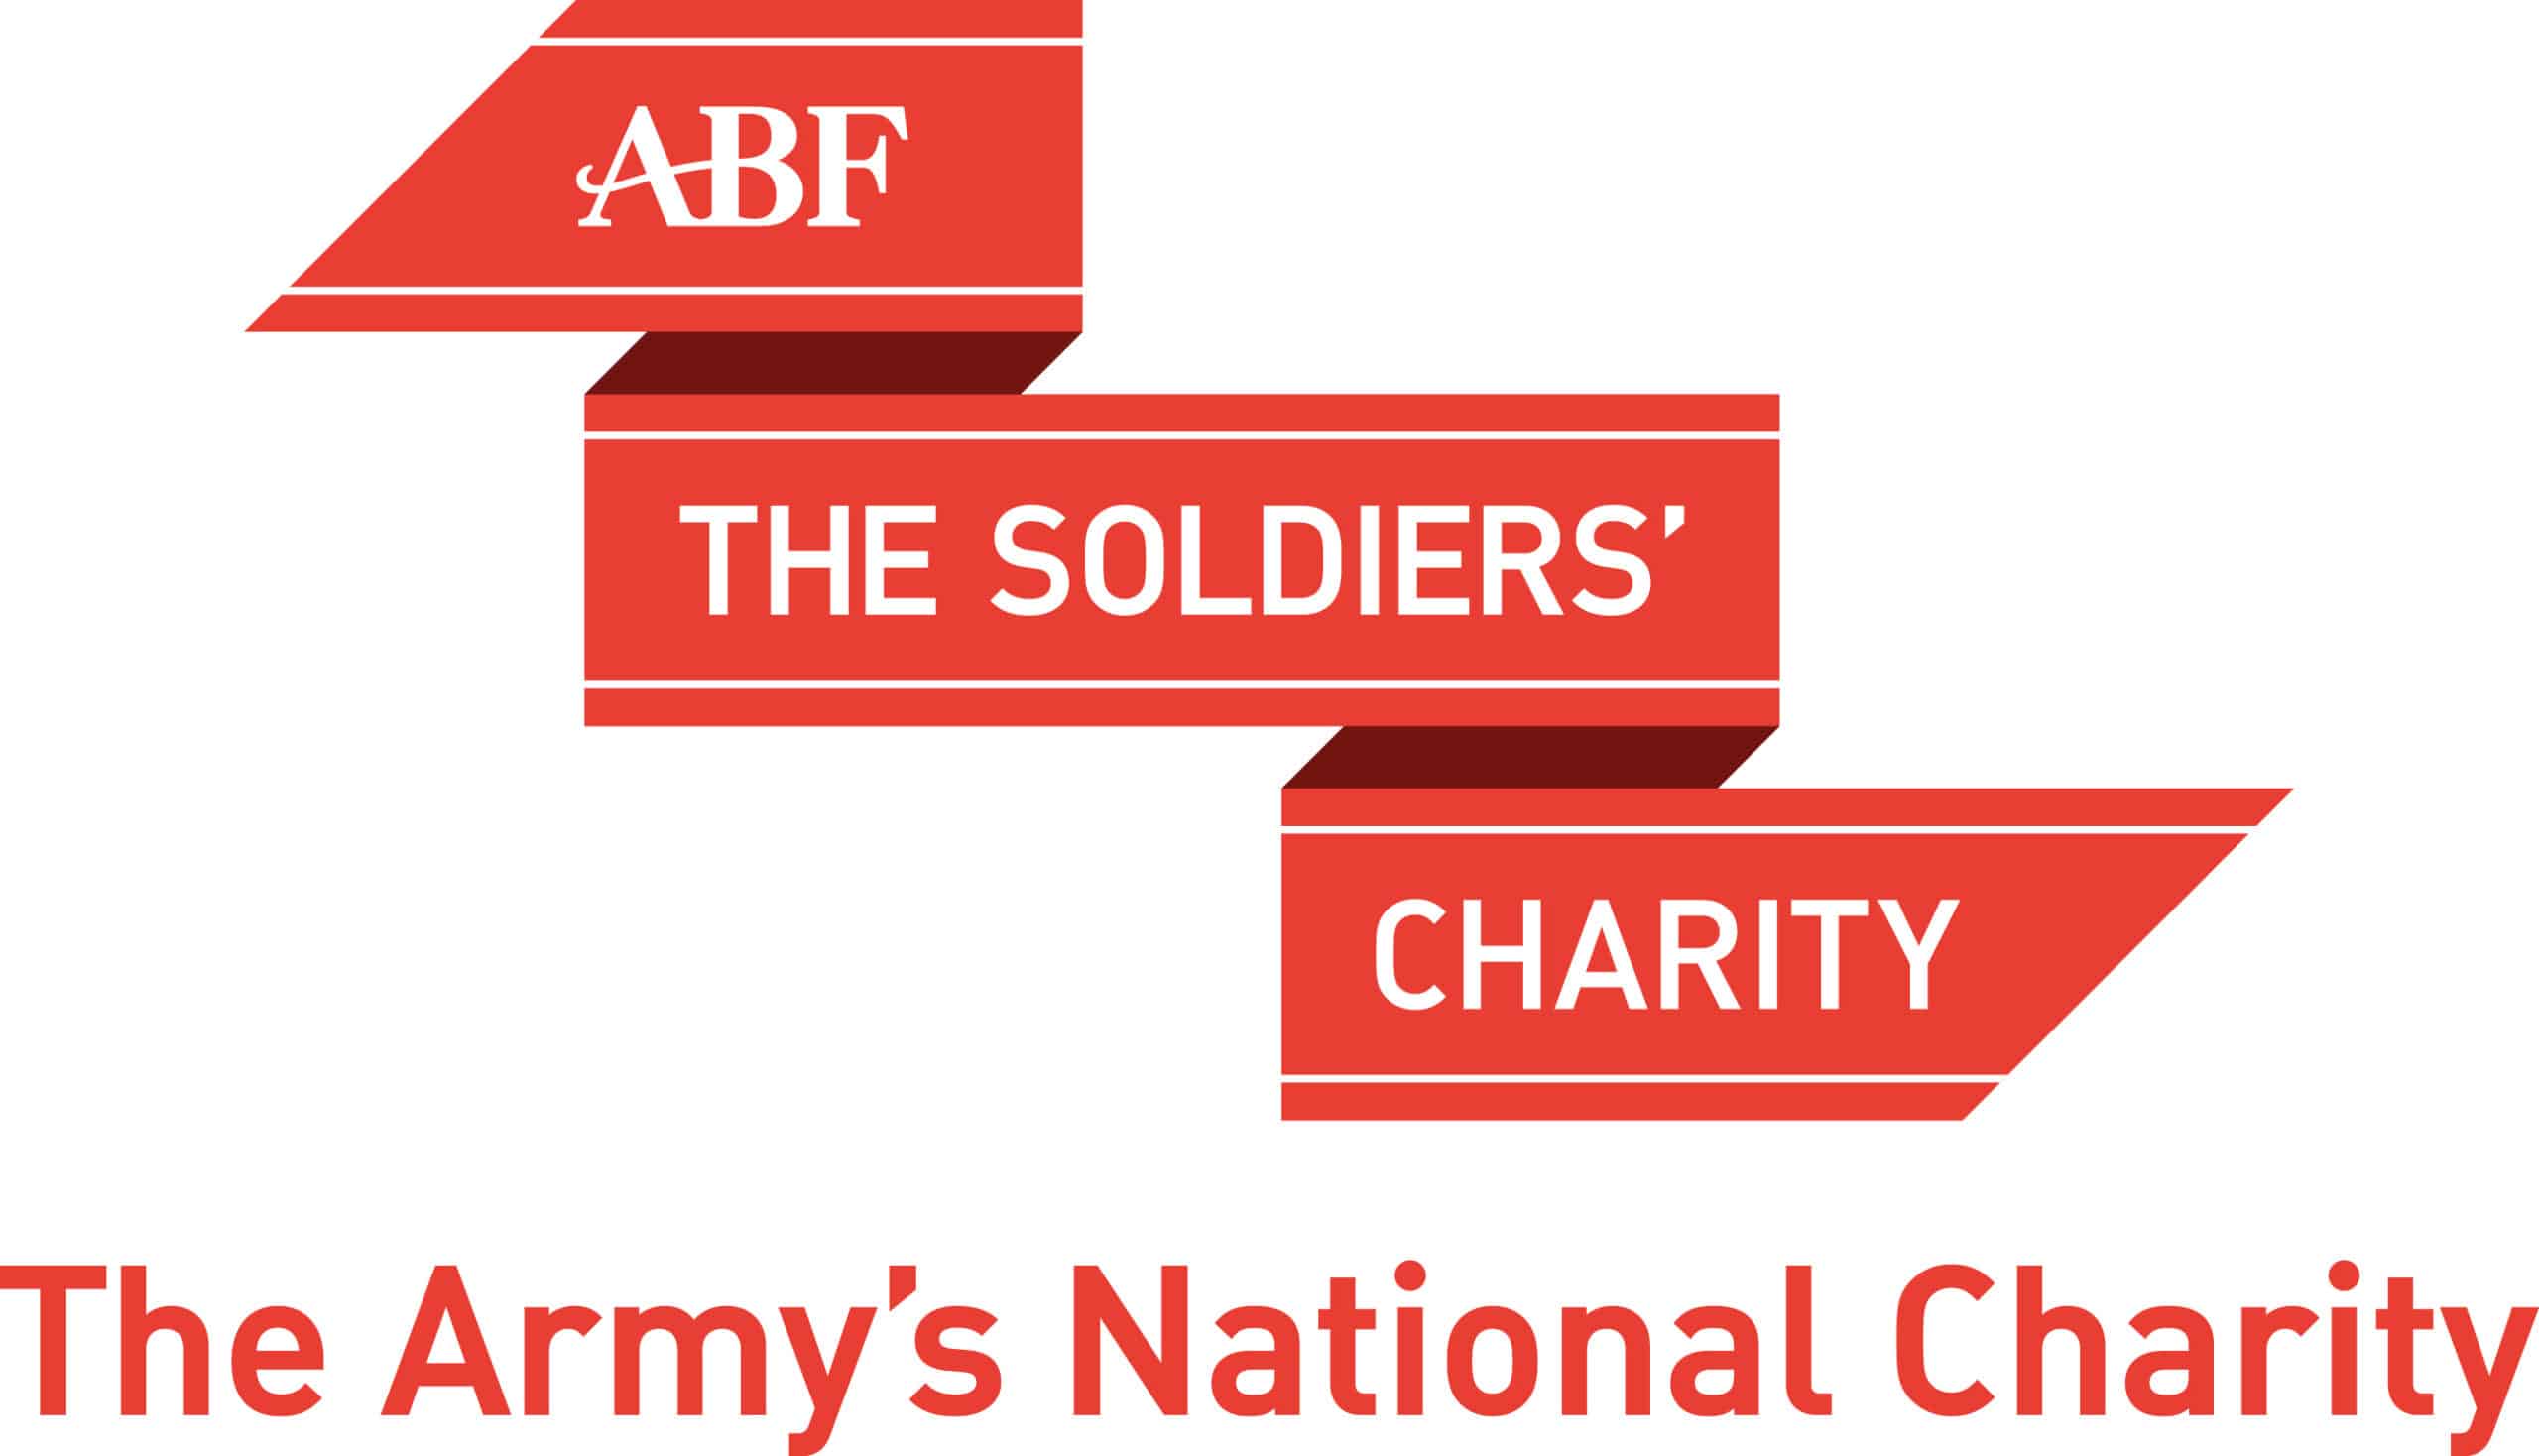 ABF The Soldiers' Charity The Army's National Charity graphic